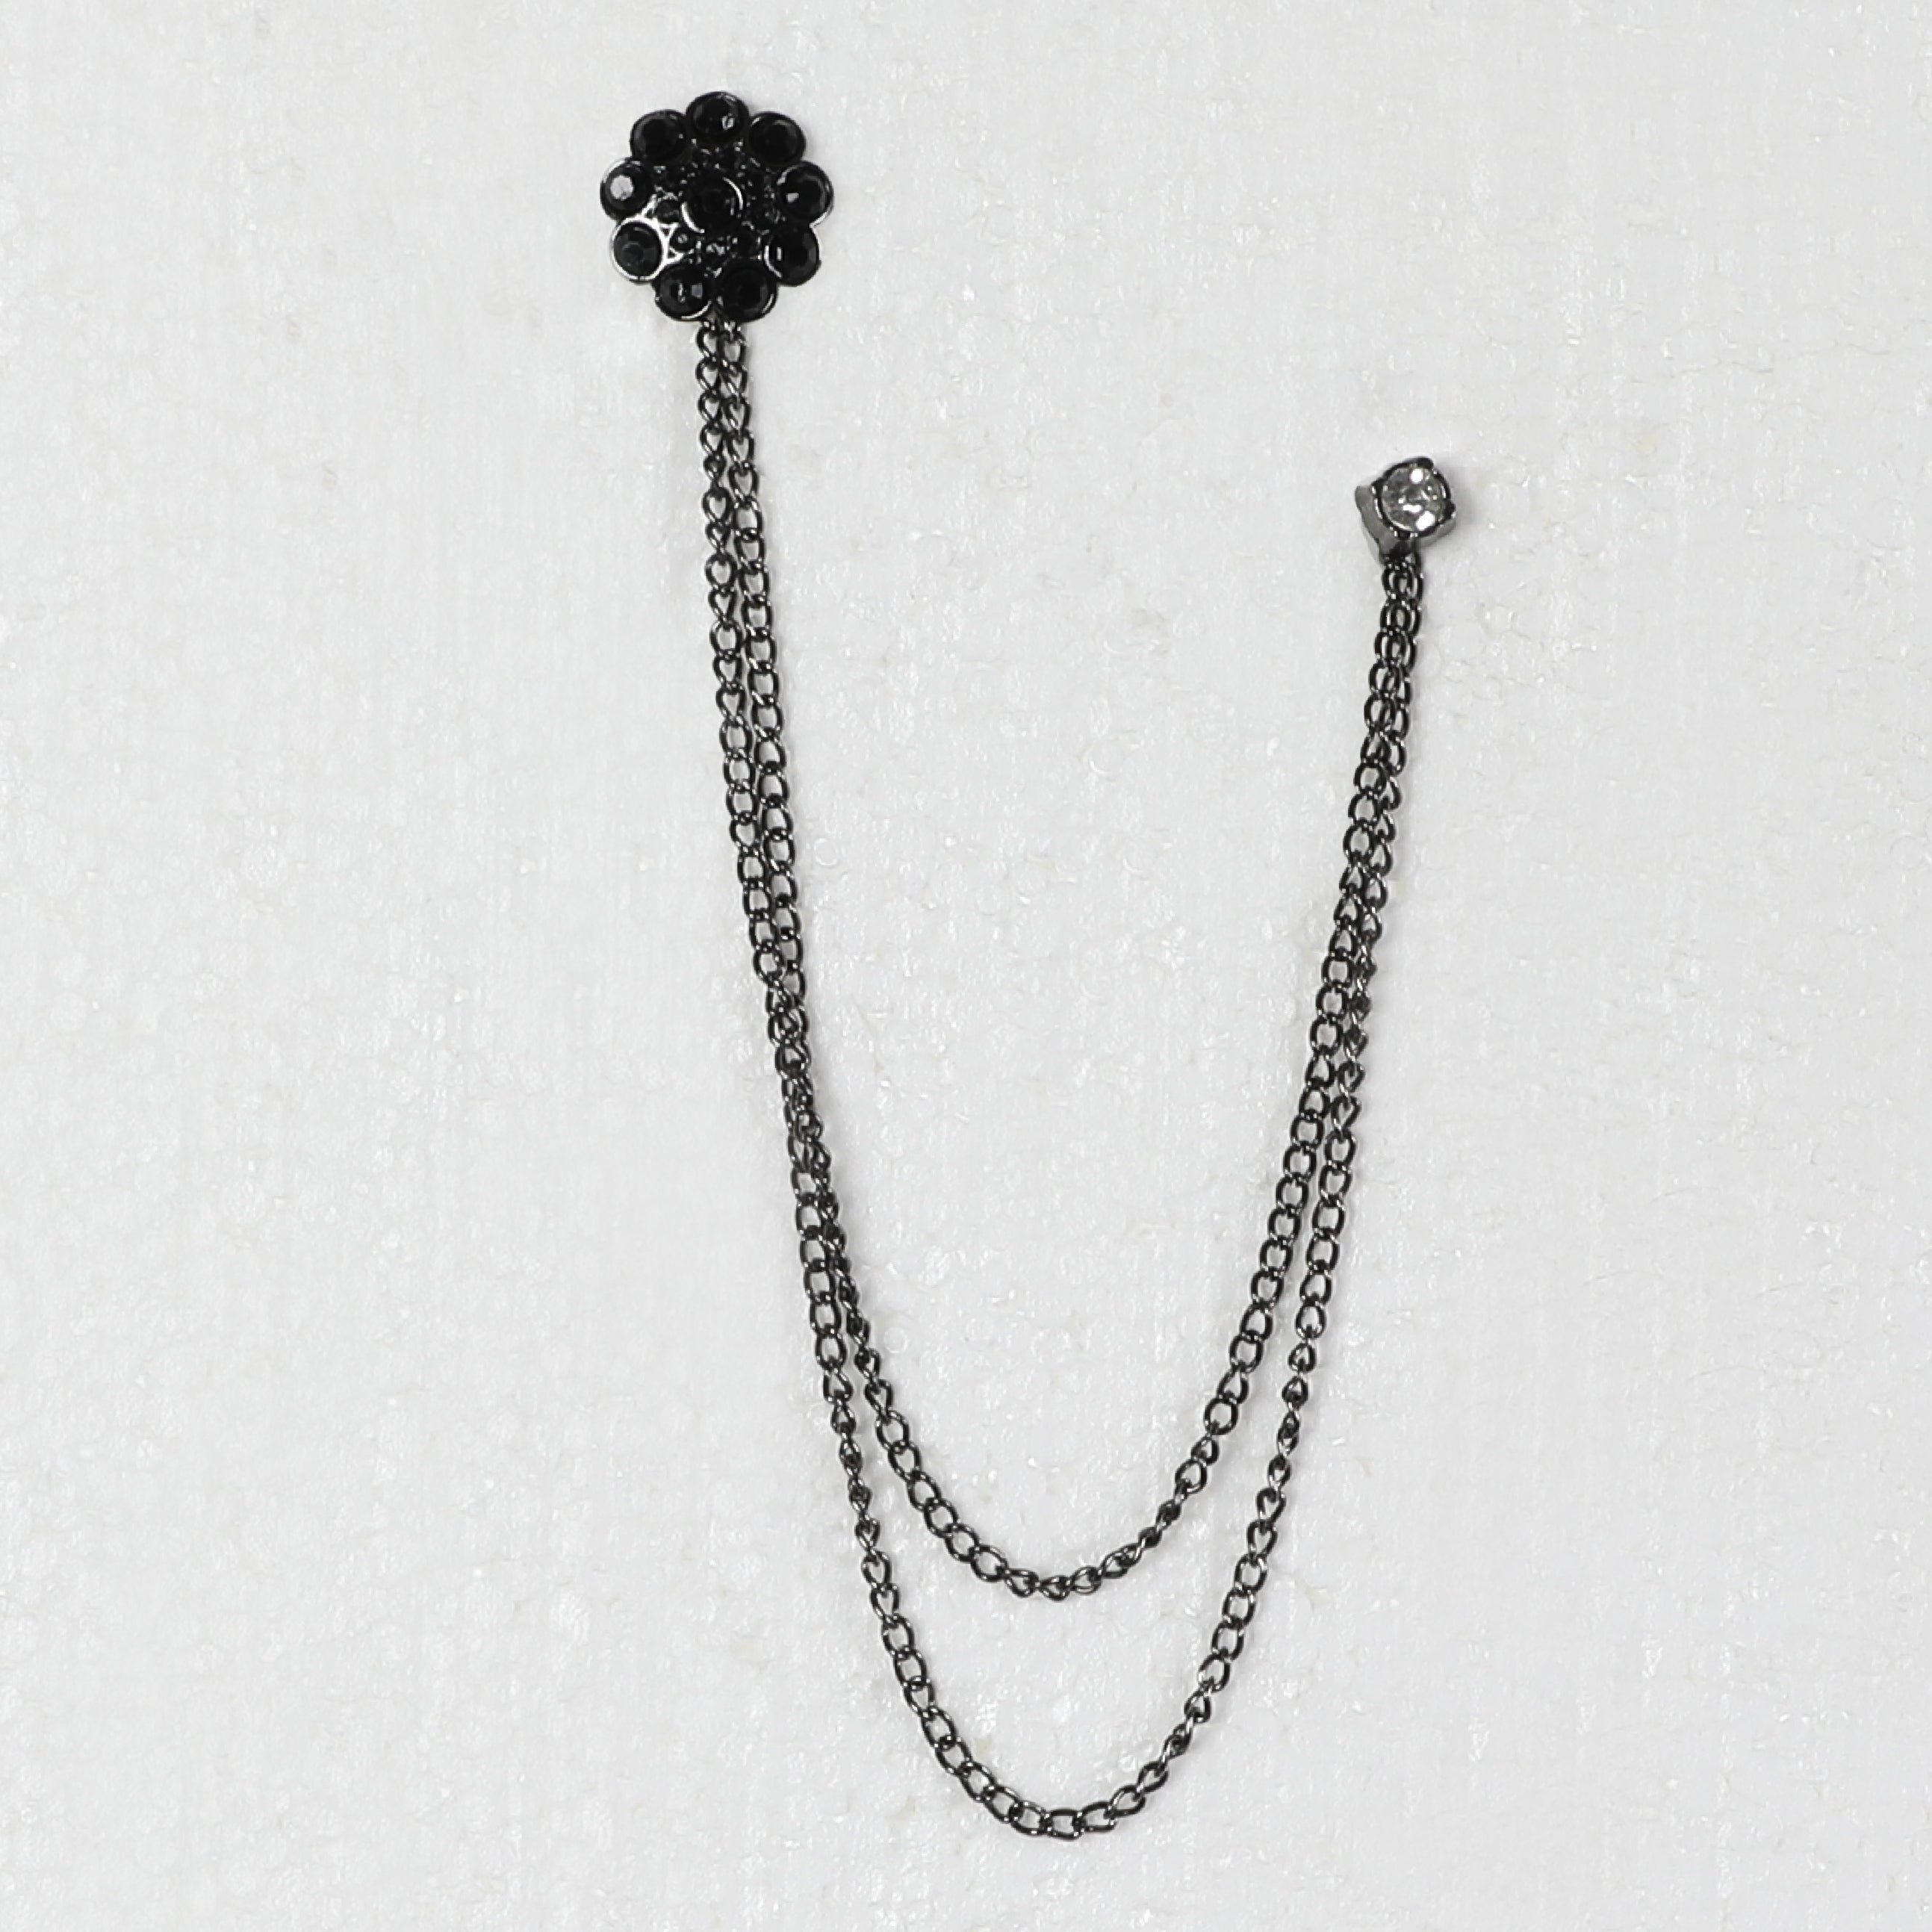 Men Black Chained Pin With Black Flower Design